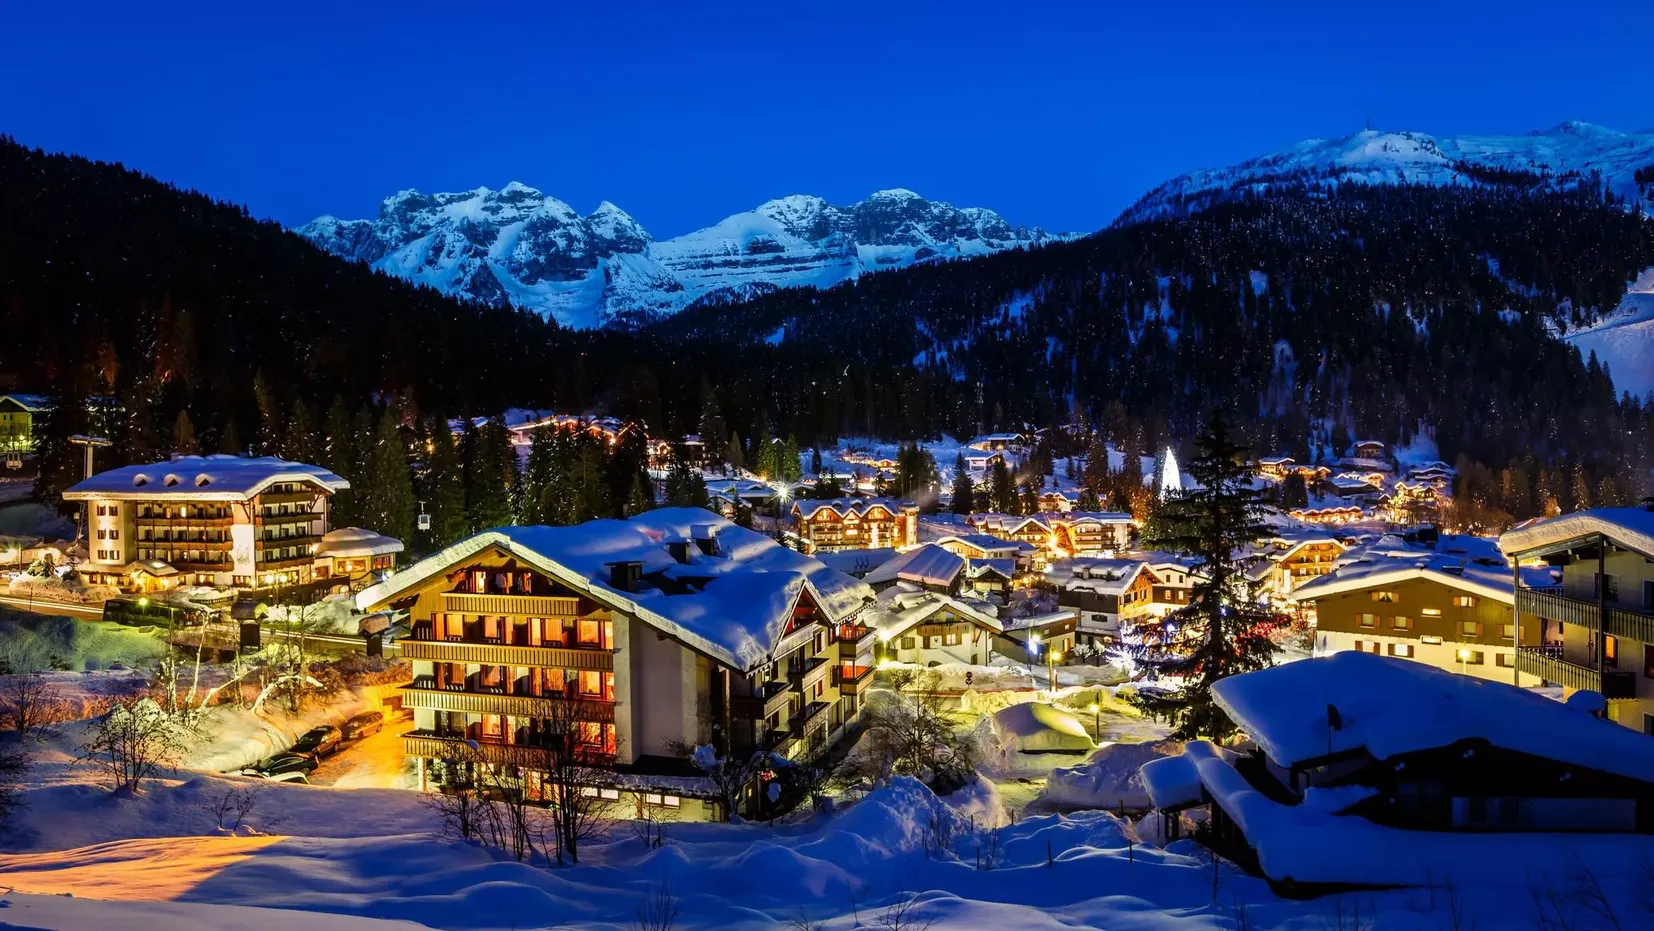 Madonna di Campiglio | Trentino-South Tyrol Region, Italy - Rated 5